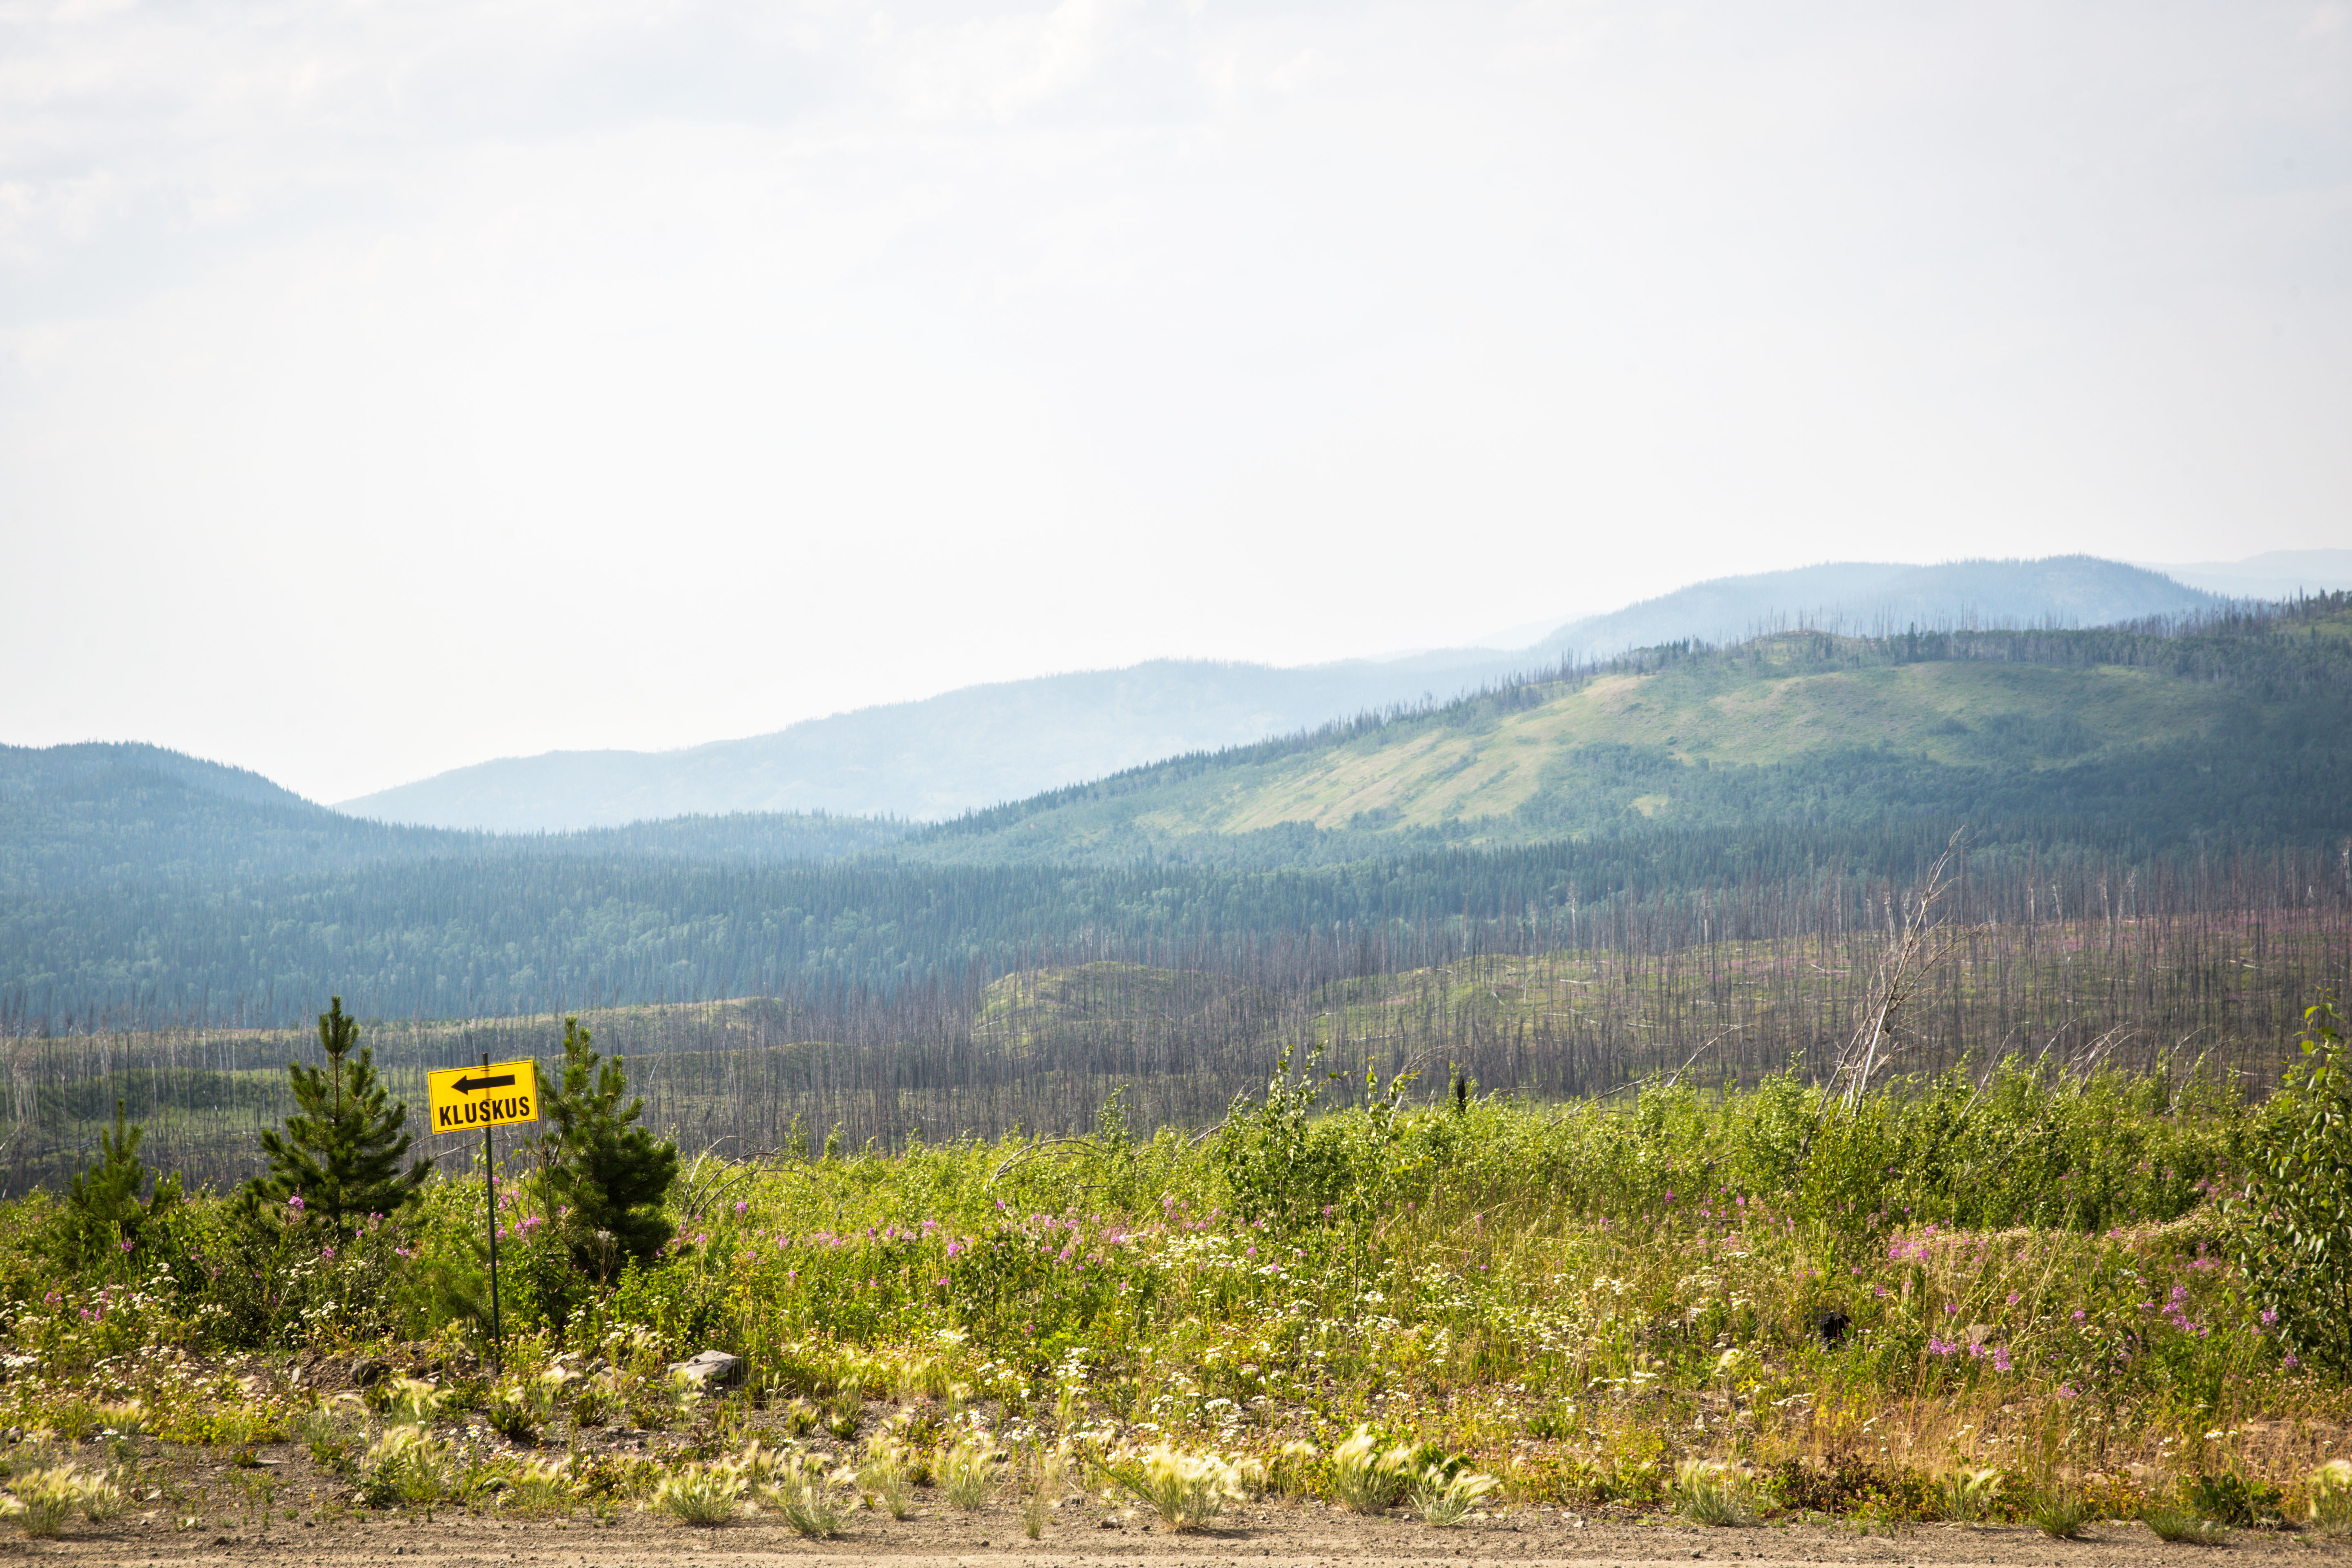 Shot of the landscape with a sign showing "Kluskus" and an arrow pointing left